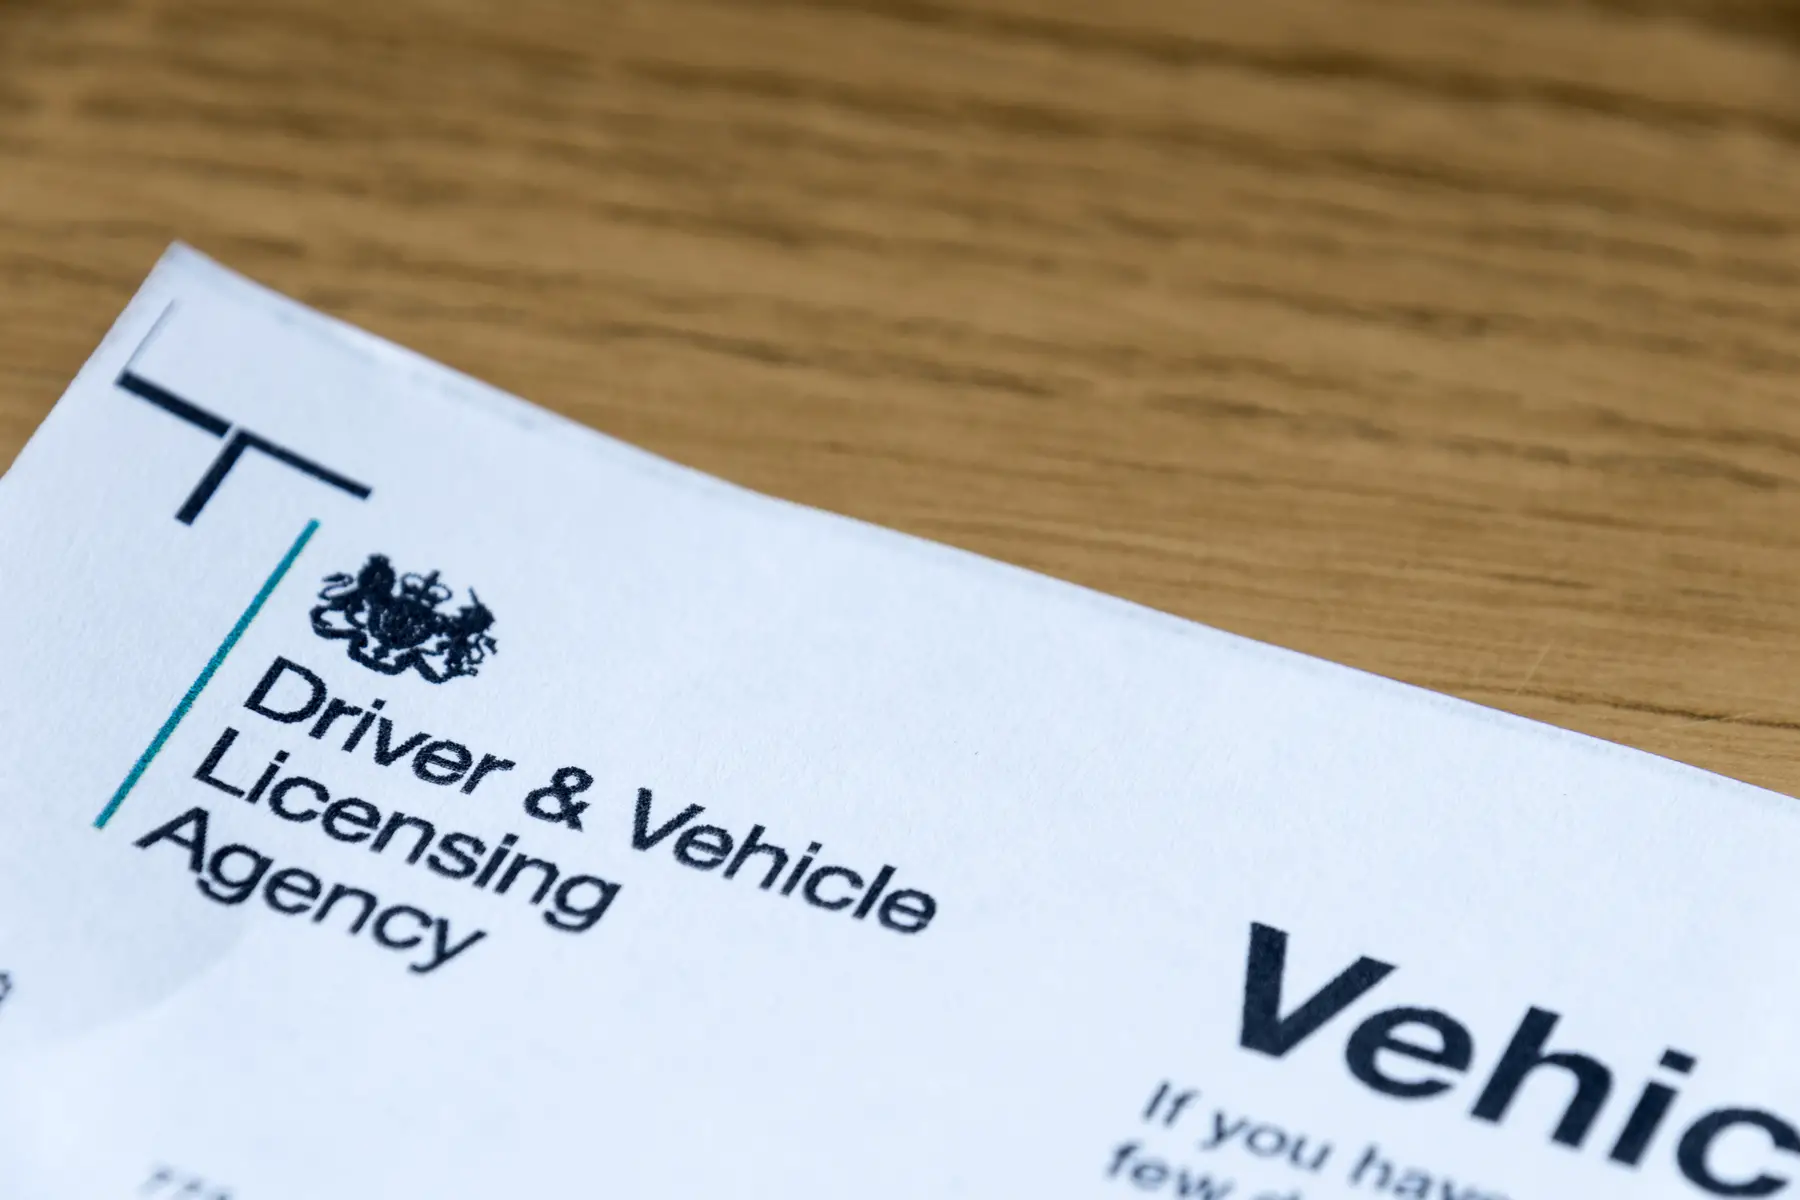 A letter from the Driver and Vehicle Licensing Agency in the UK